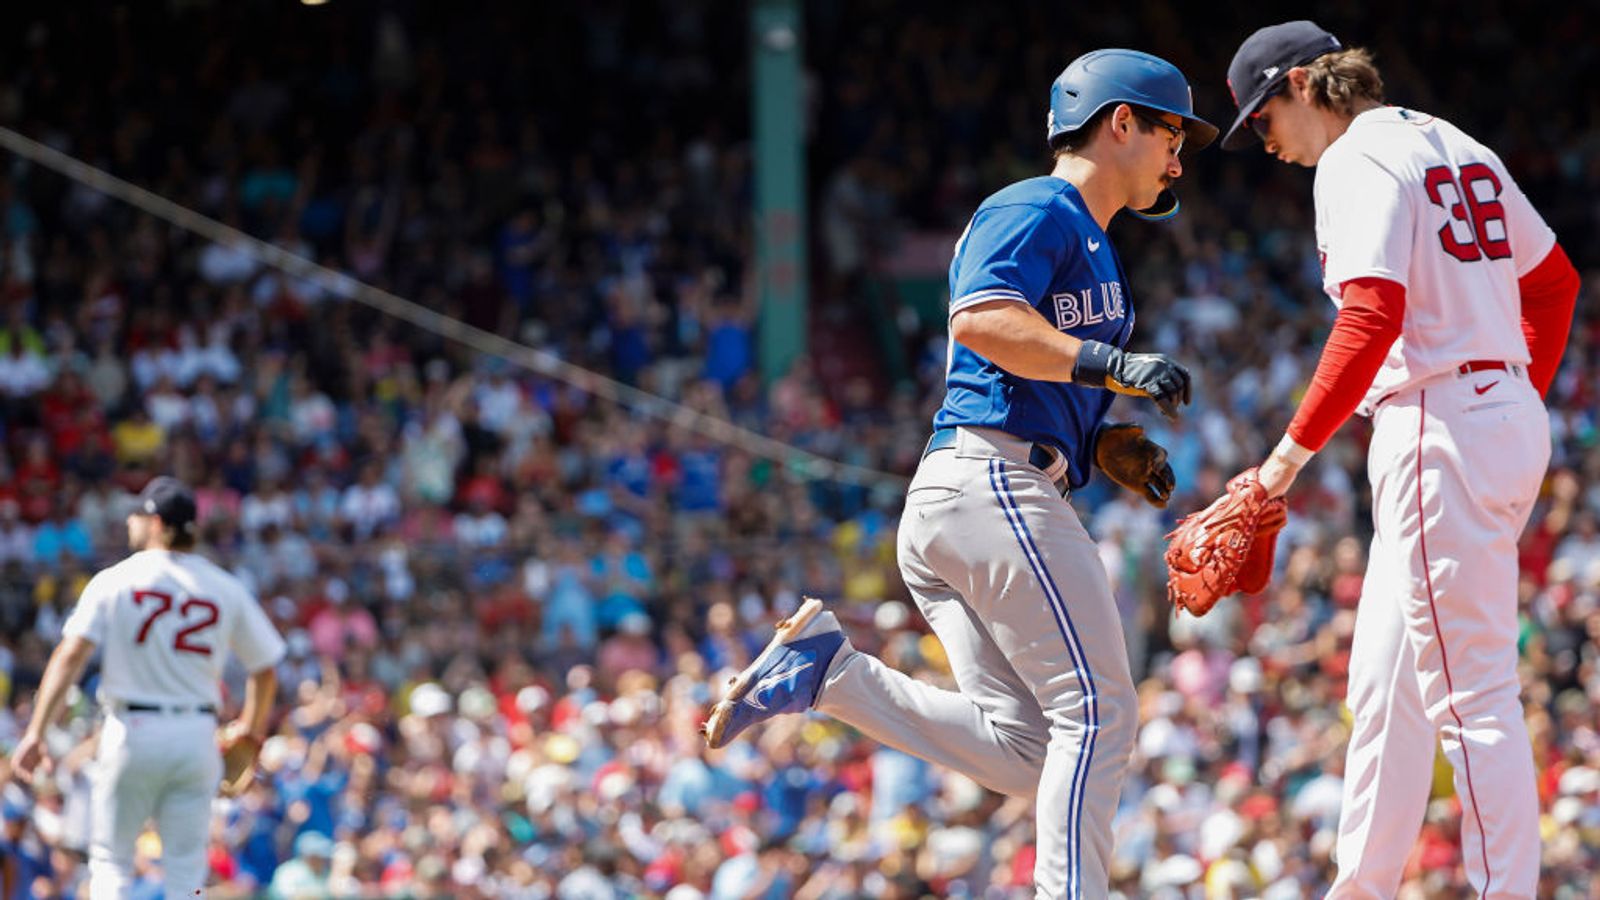 Ninth-inning HR gives Red Sox sweep of Blue Jays